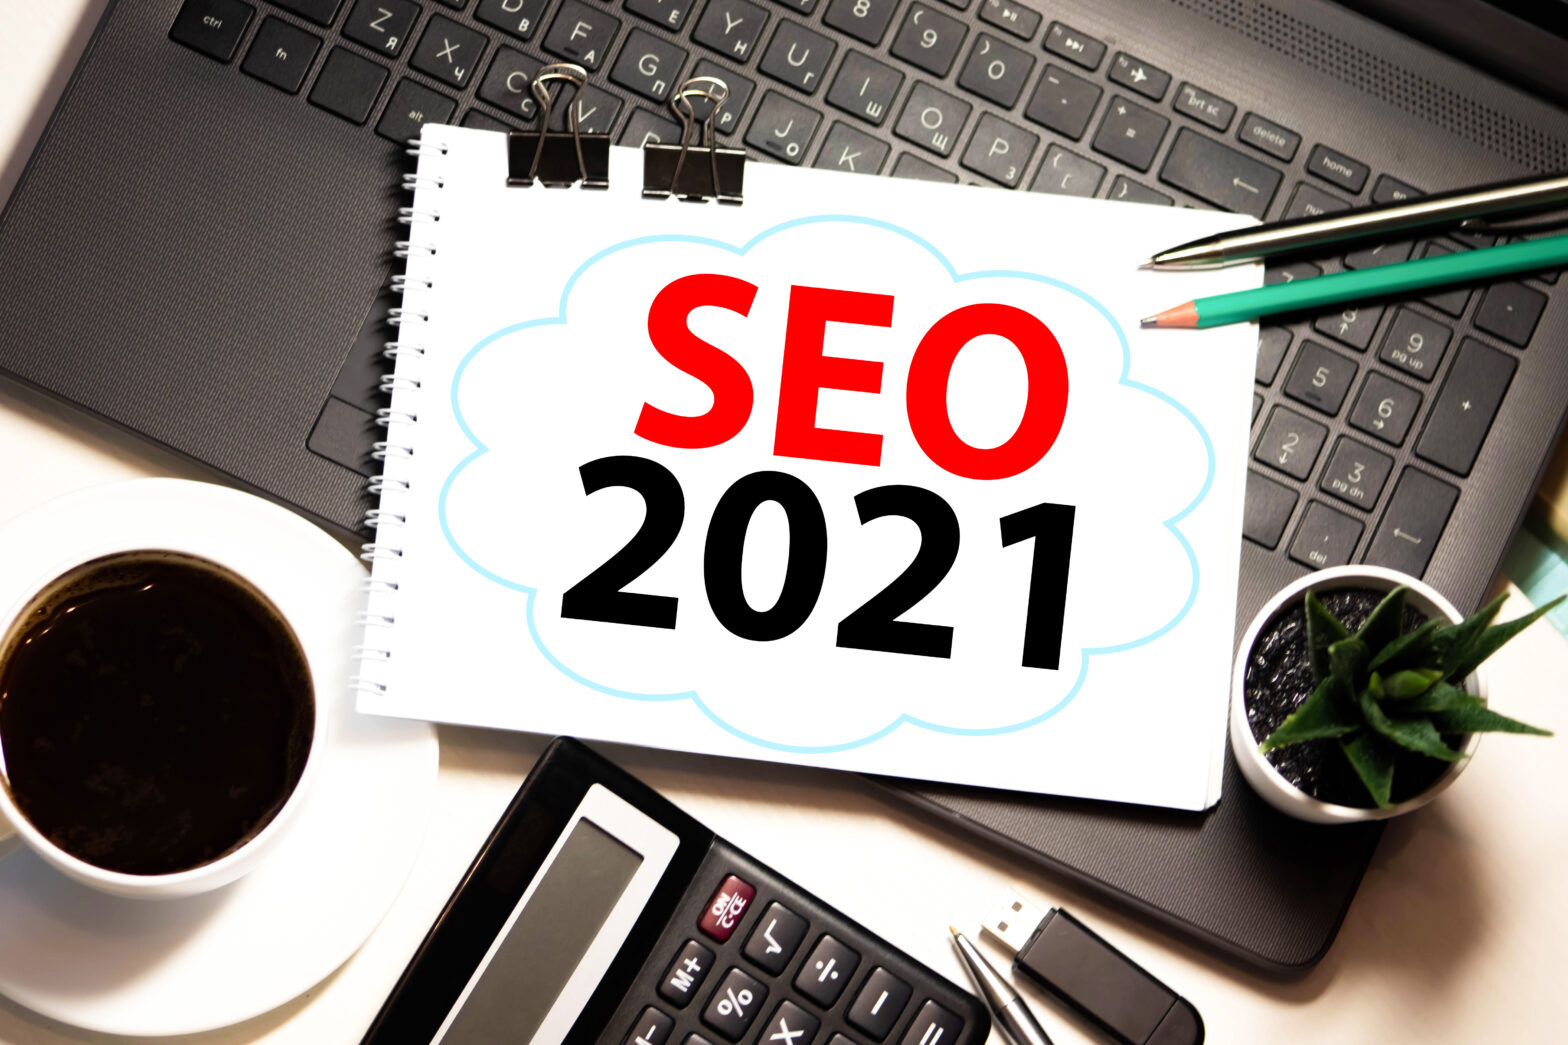 Customer Scout Automotive SEO in 2021